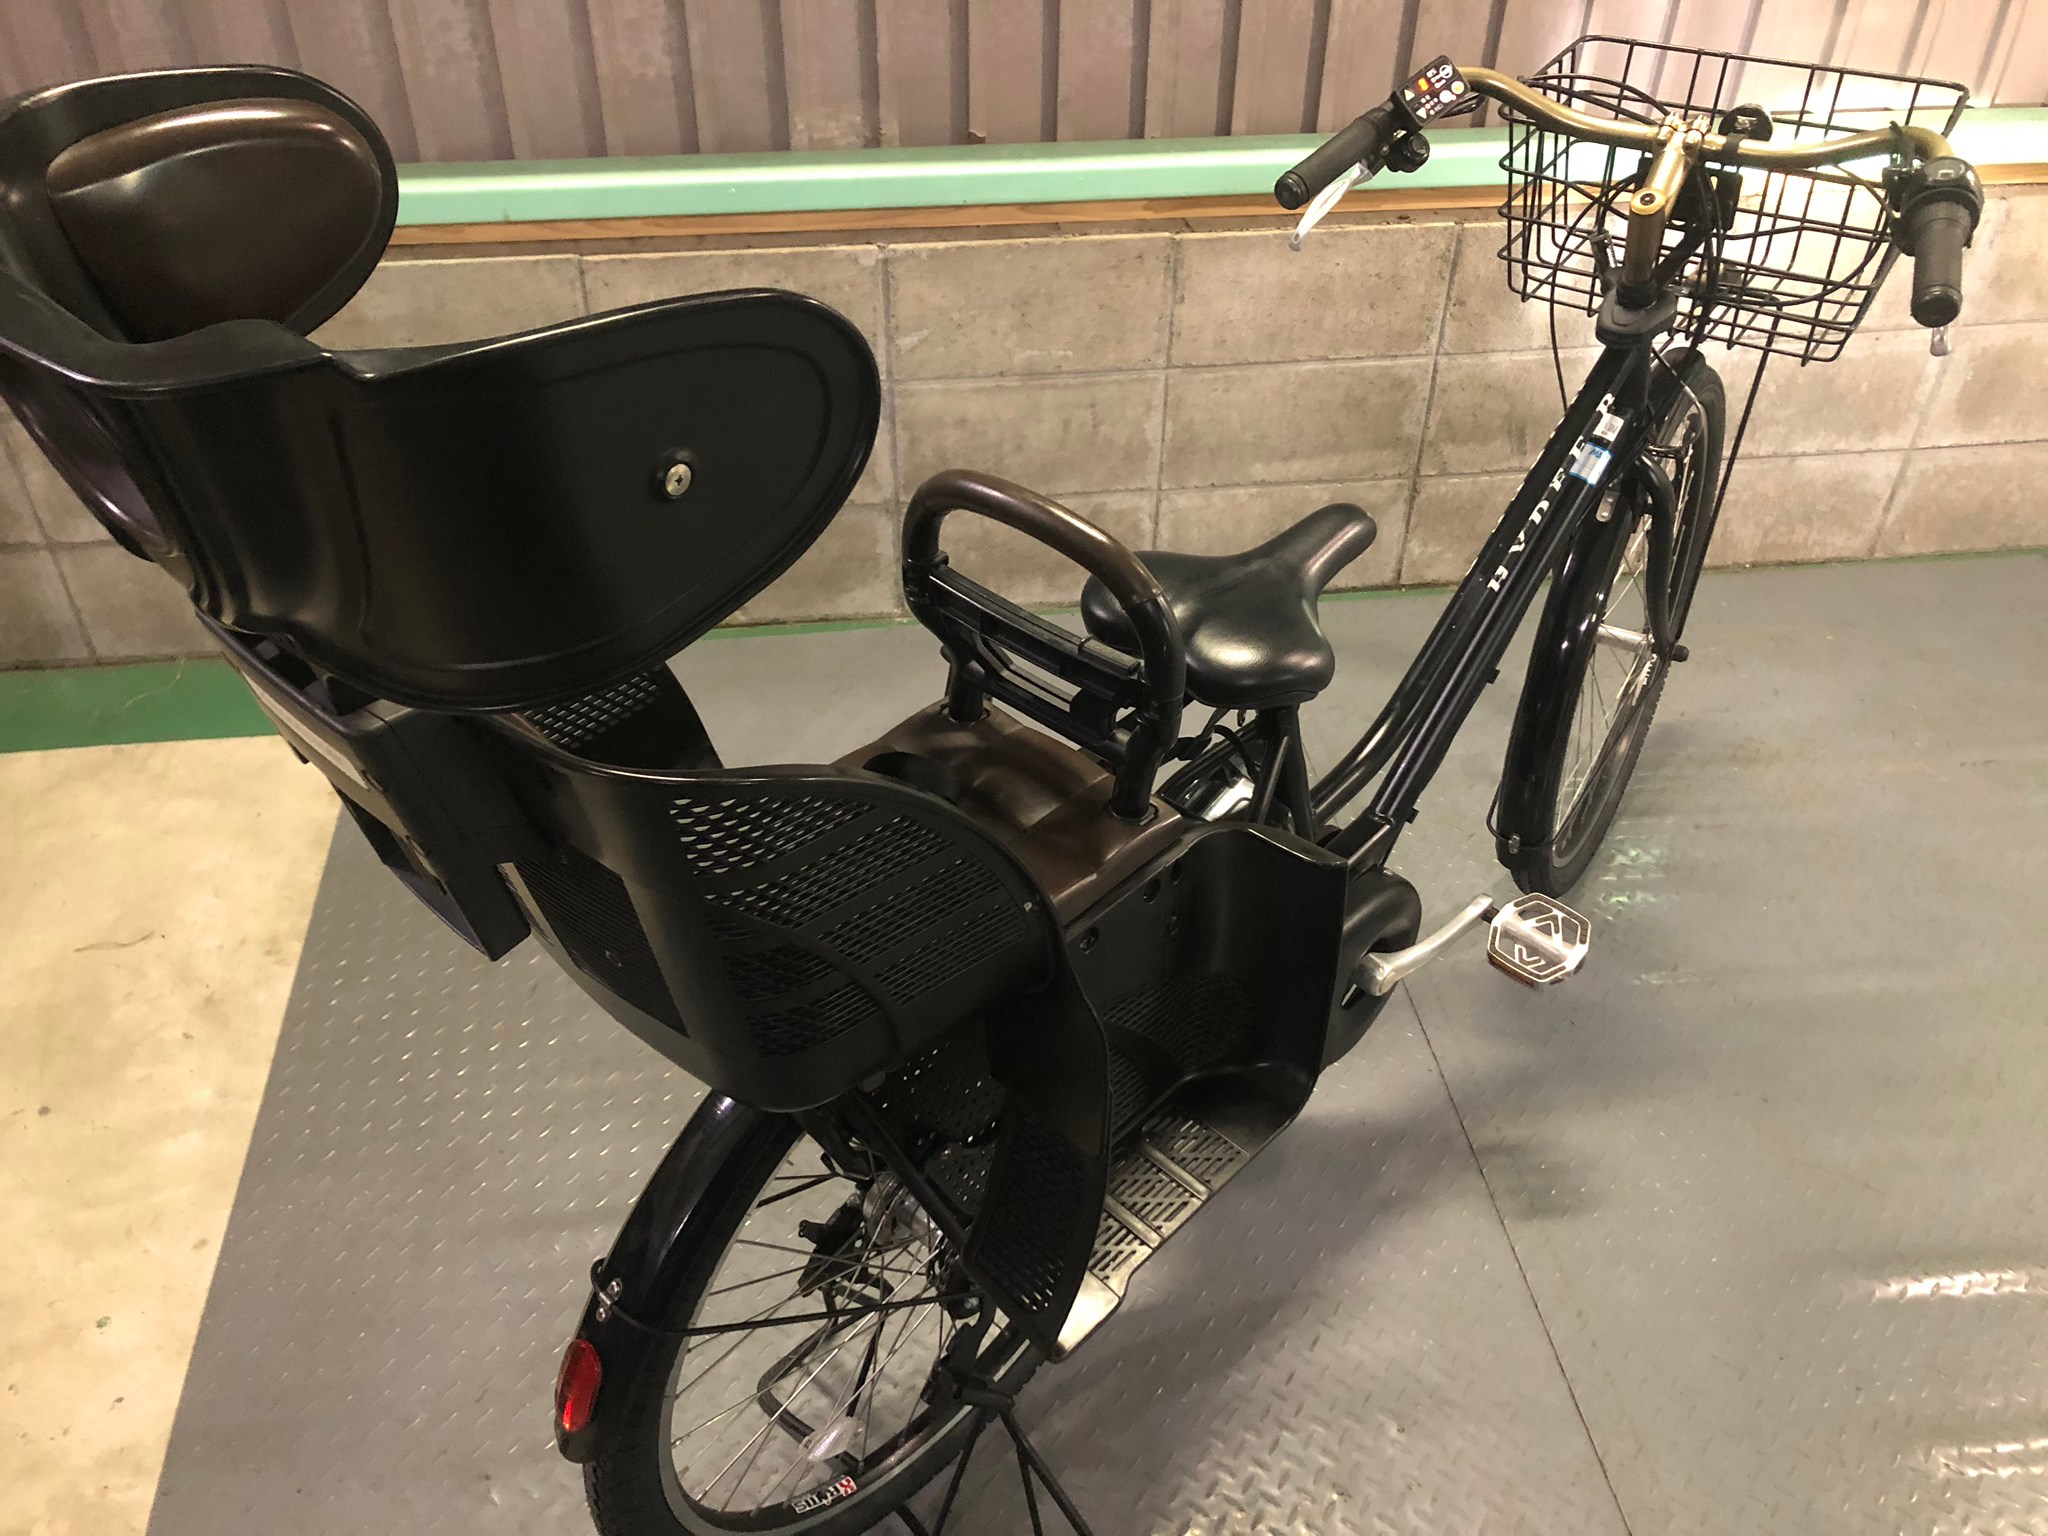 SOLD OUT】電動自転車 ブリヂストン HYDEE.B 後ろ子供乗せ無し値引き有 